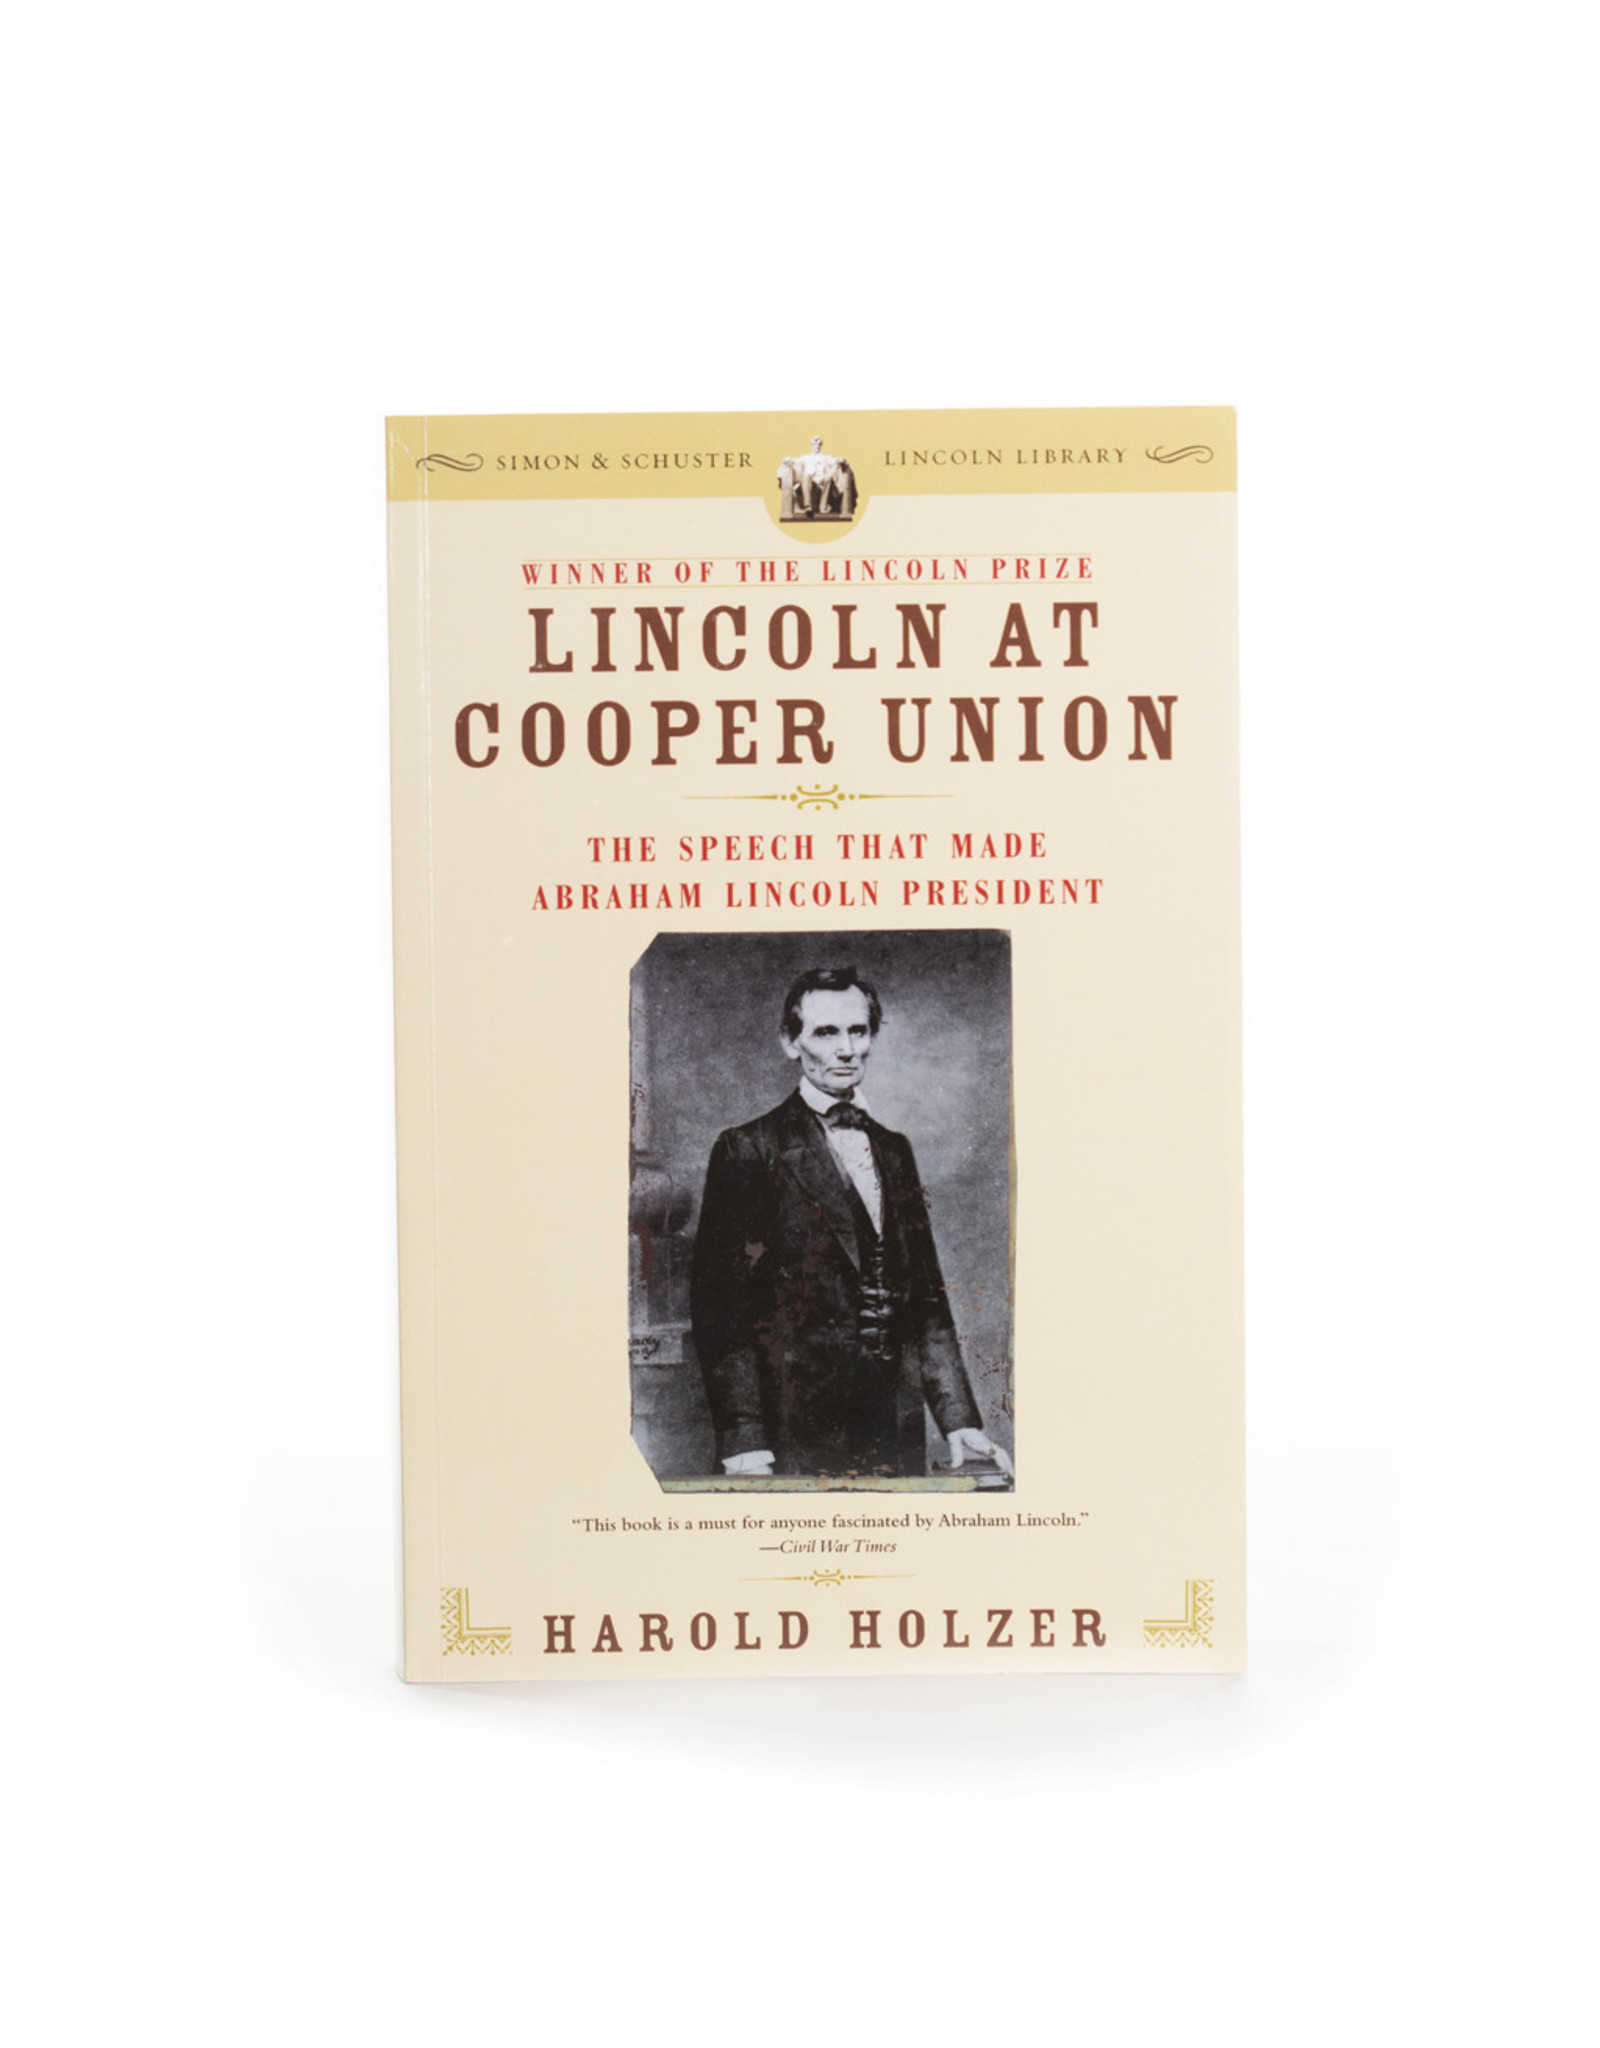 Lincoln at Cooper Union, Harold Holzer